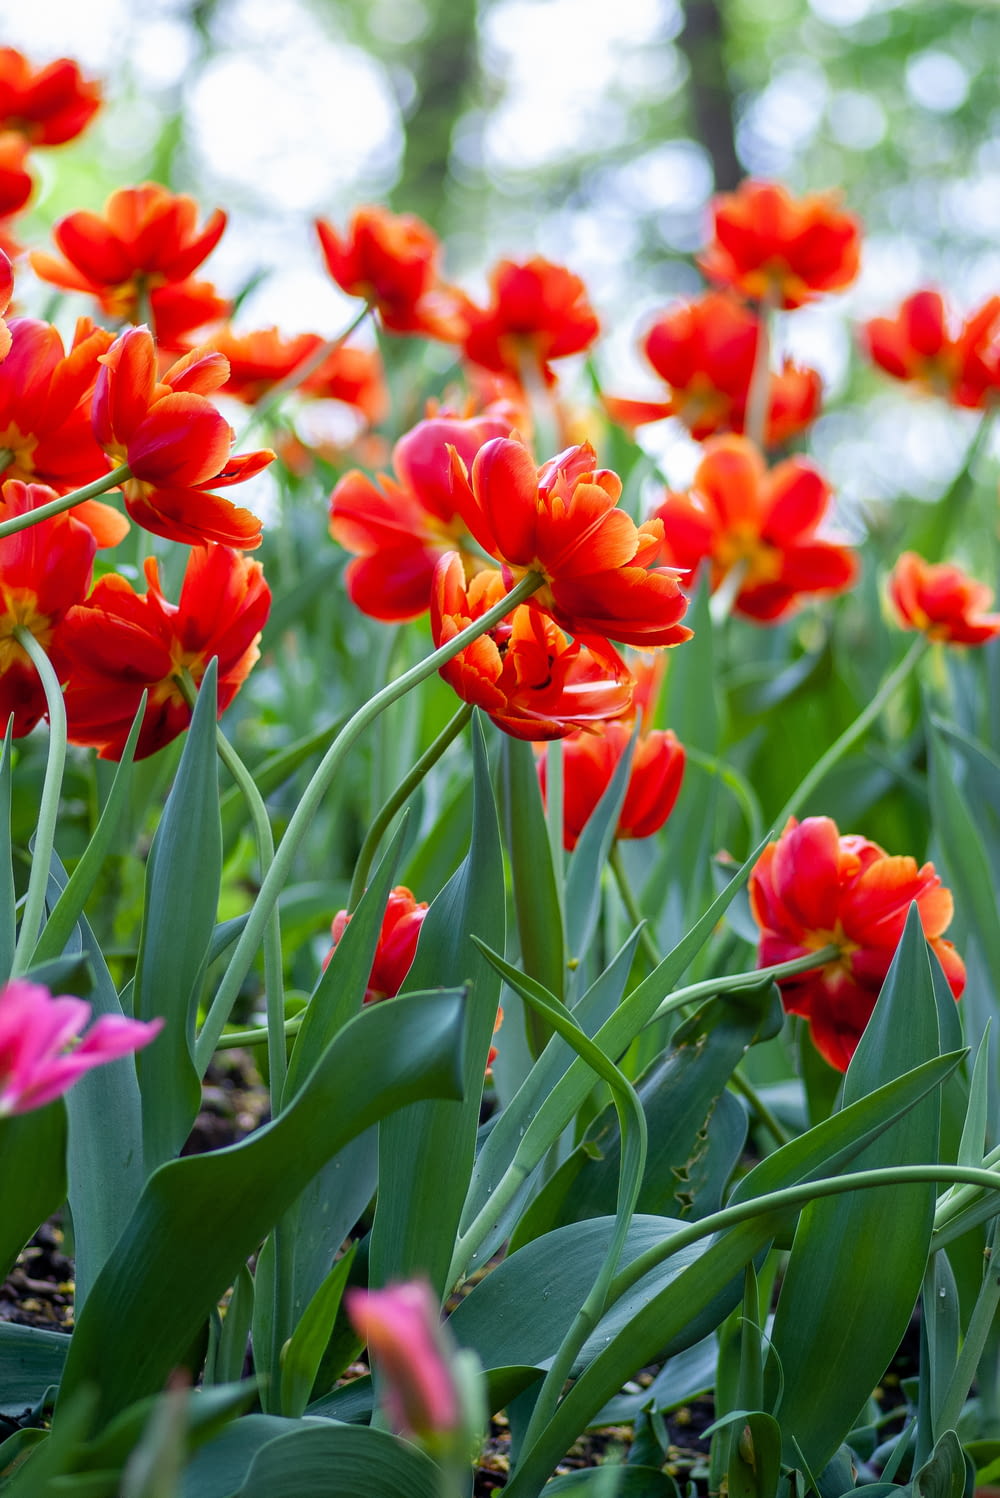 selective focus photo of red-and-orange-petaled flowes